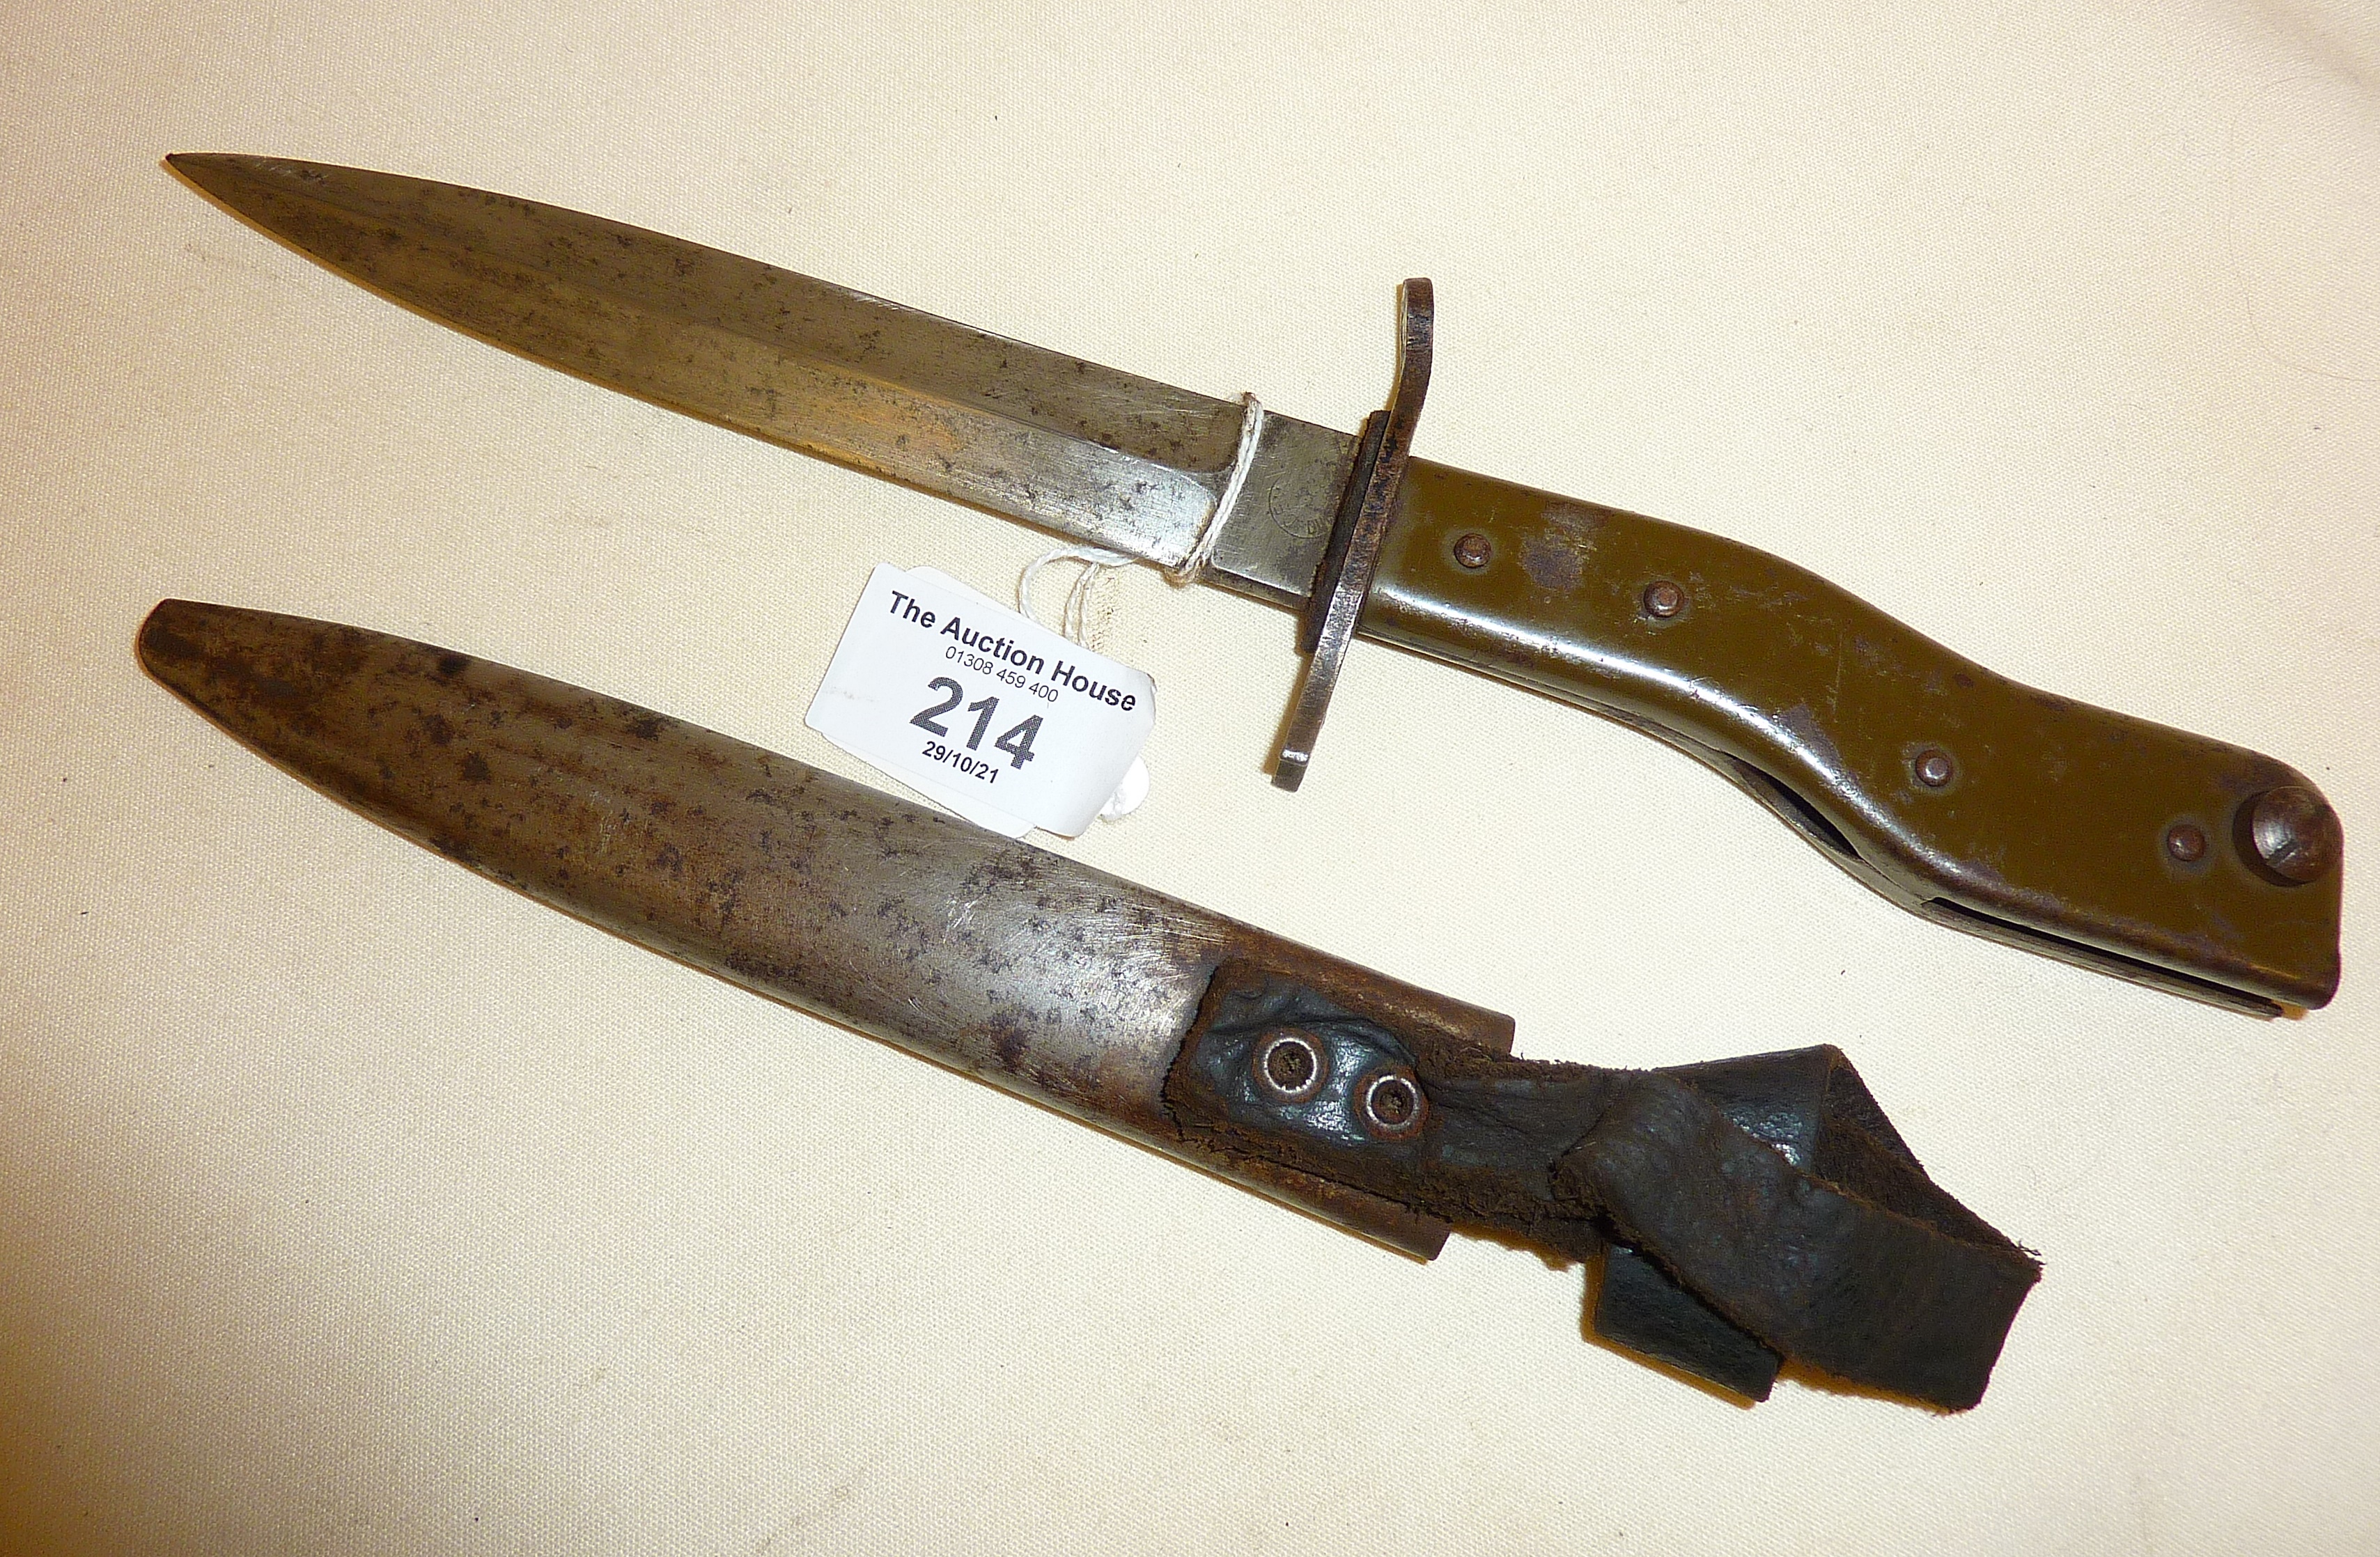 WW1 German trench bayonet/fighting knife, marked to blade as DRGM DEMAG DUISBURG, and measuring